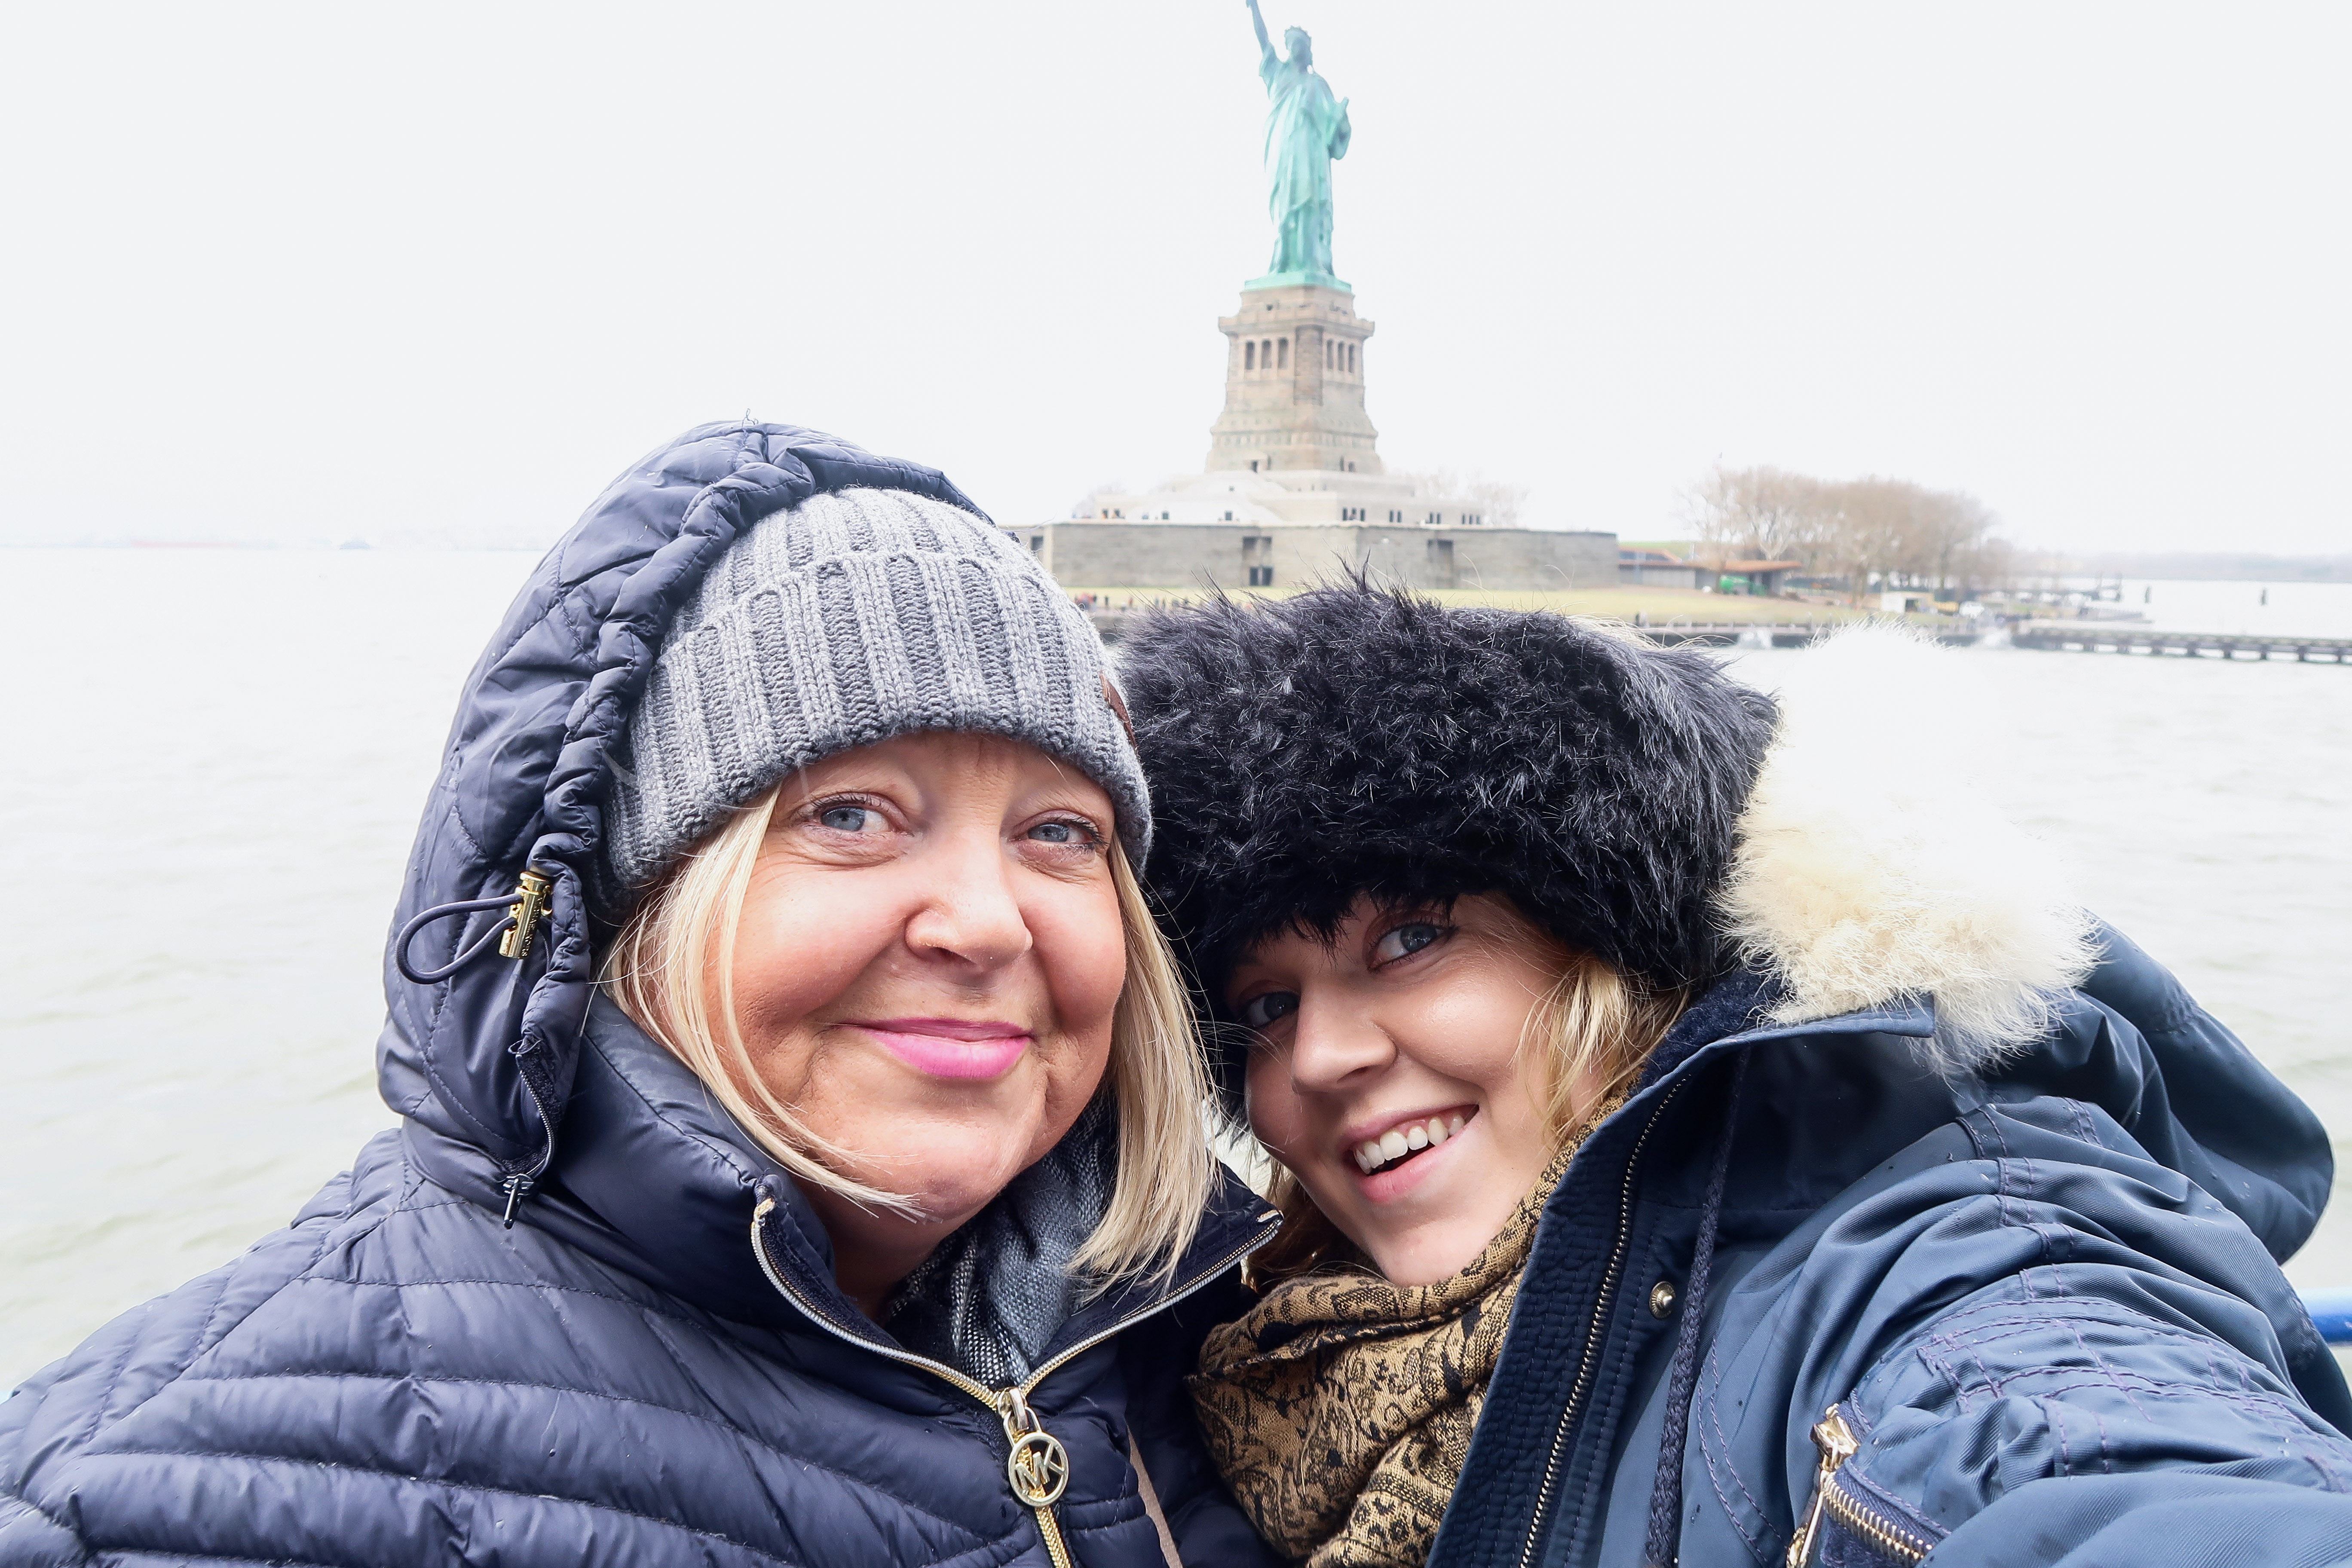 Statue of Liberty | 5 top tips for planning a visit to New York City | Things you should know before you visit the big apple | Travel Guide | Elle Blonde Luxury Lifestyle Destination Blog